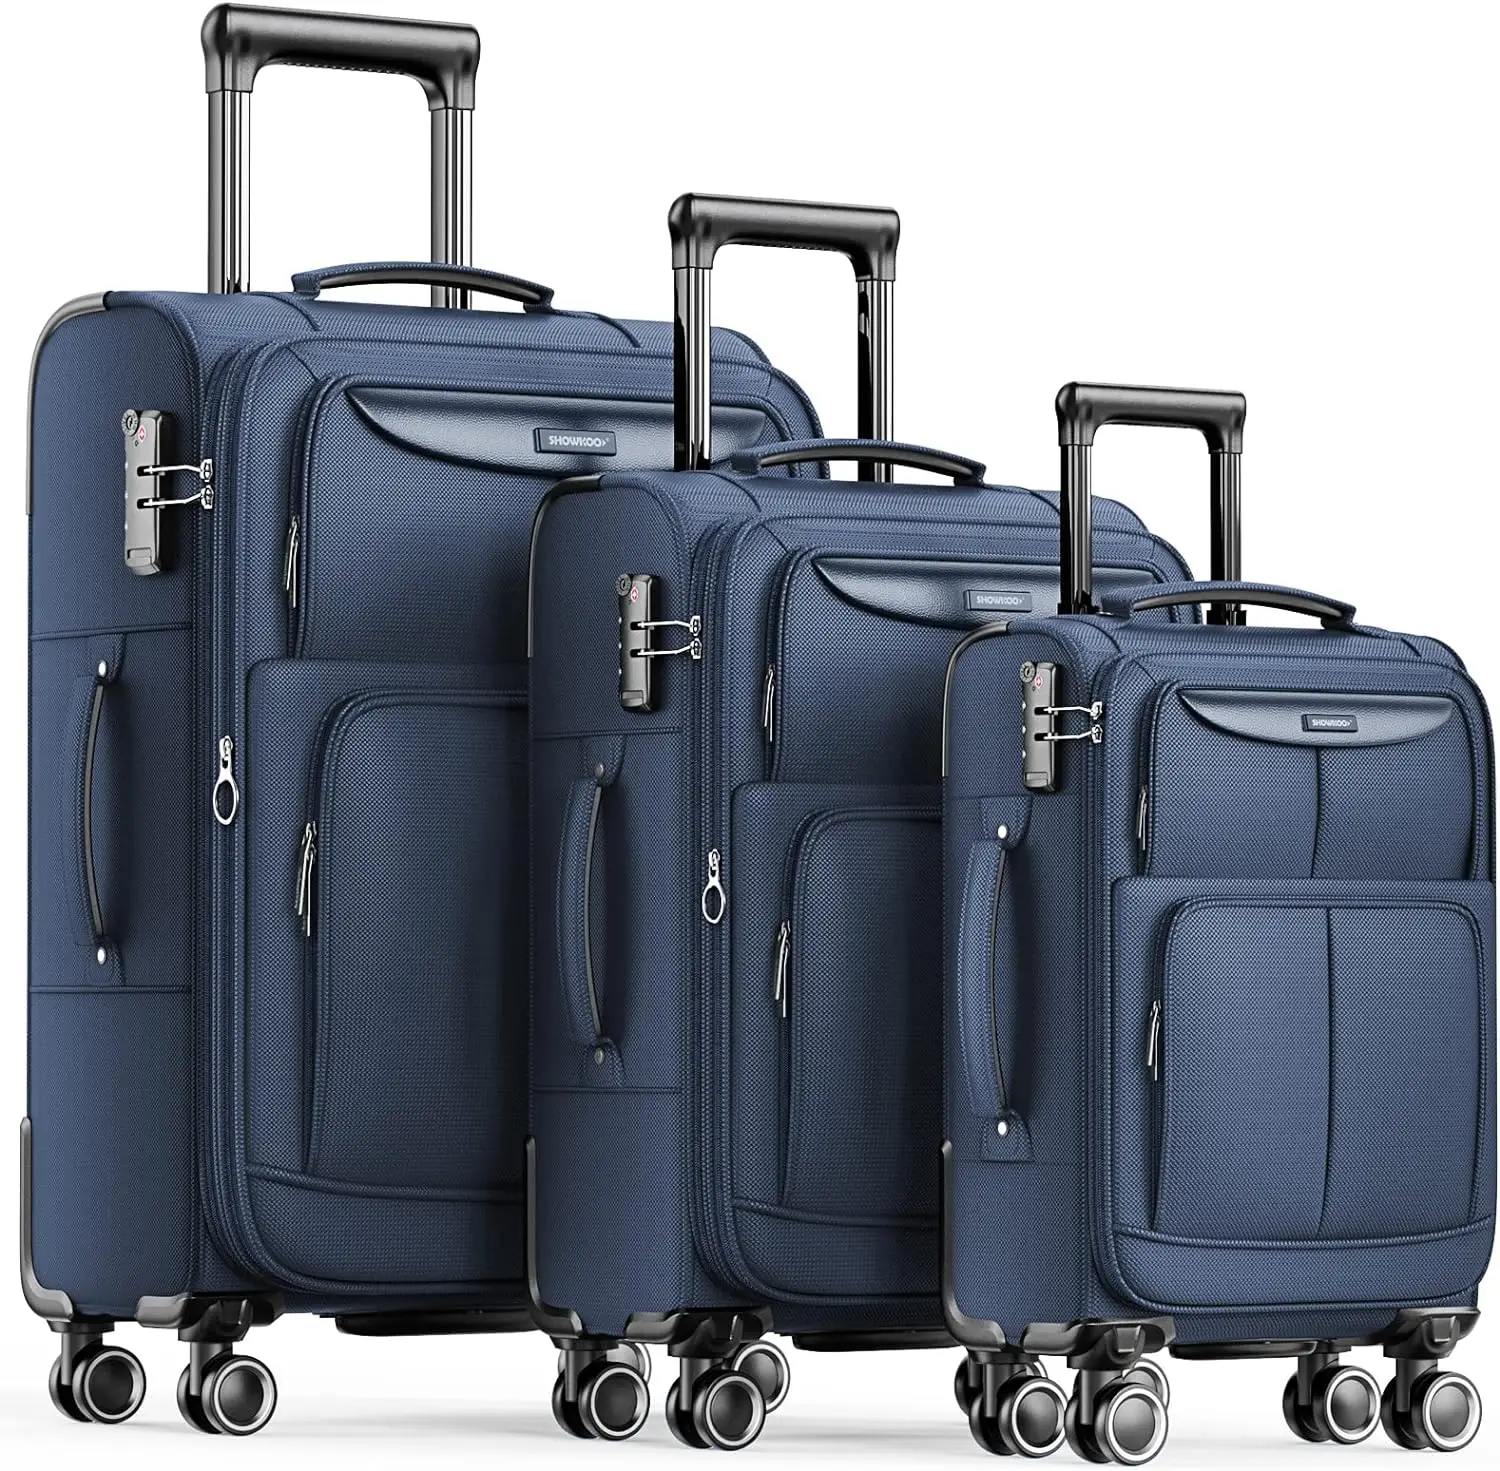 

SHOWKOO Luggage Sets 3 Piece Softside Expandable Lightweight Durable Suitcase Sets Double Spinner Wheels TSA Lock (20in/24i